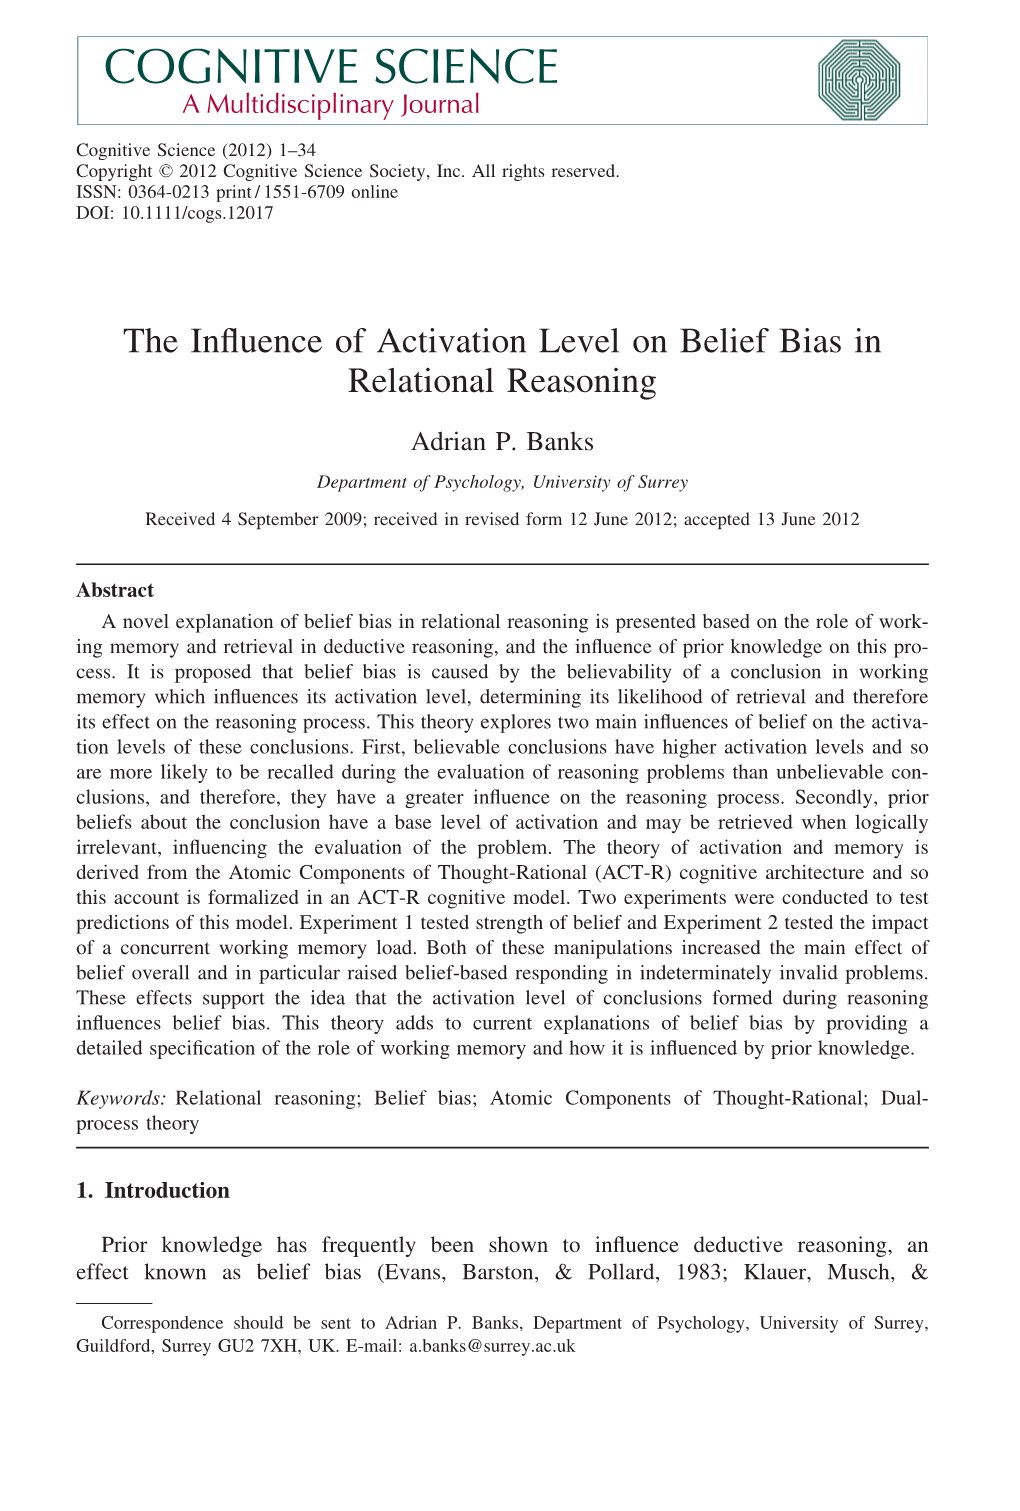 The Influence of Activation Level on Belief Bias in Relational Reasoning